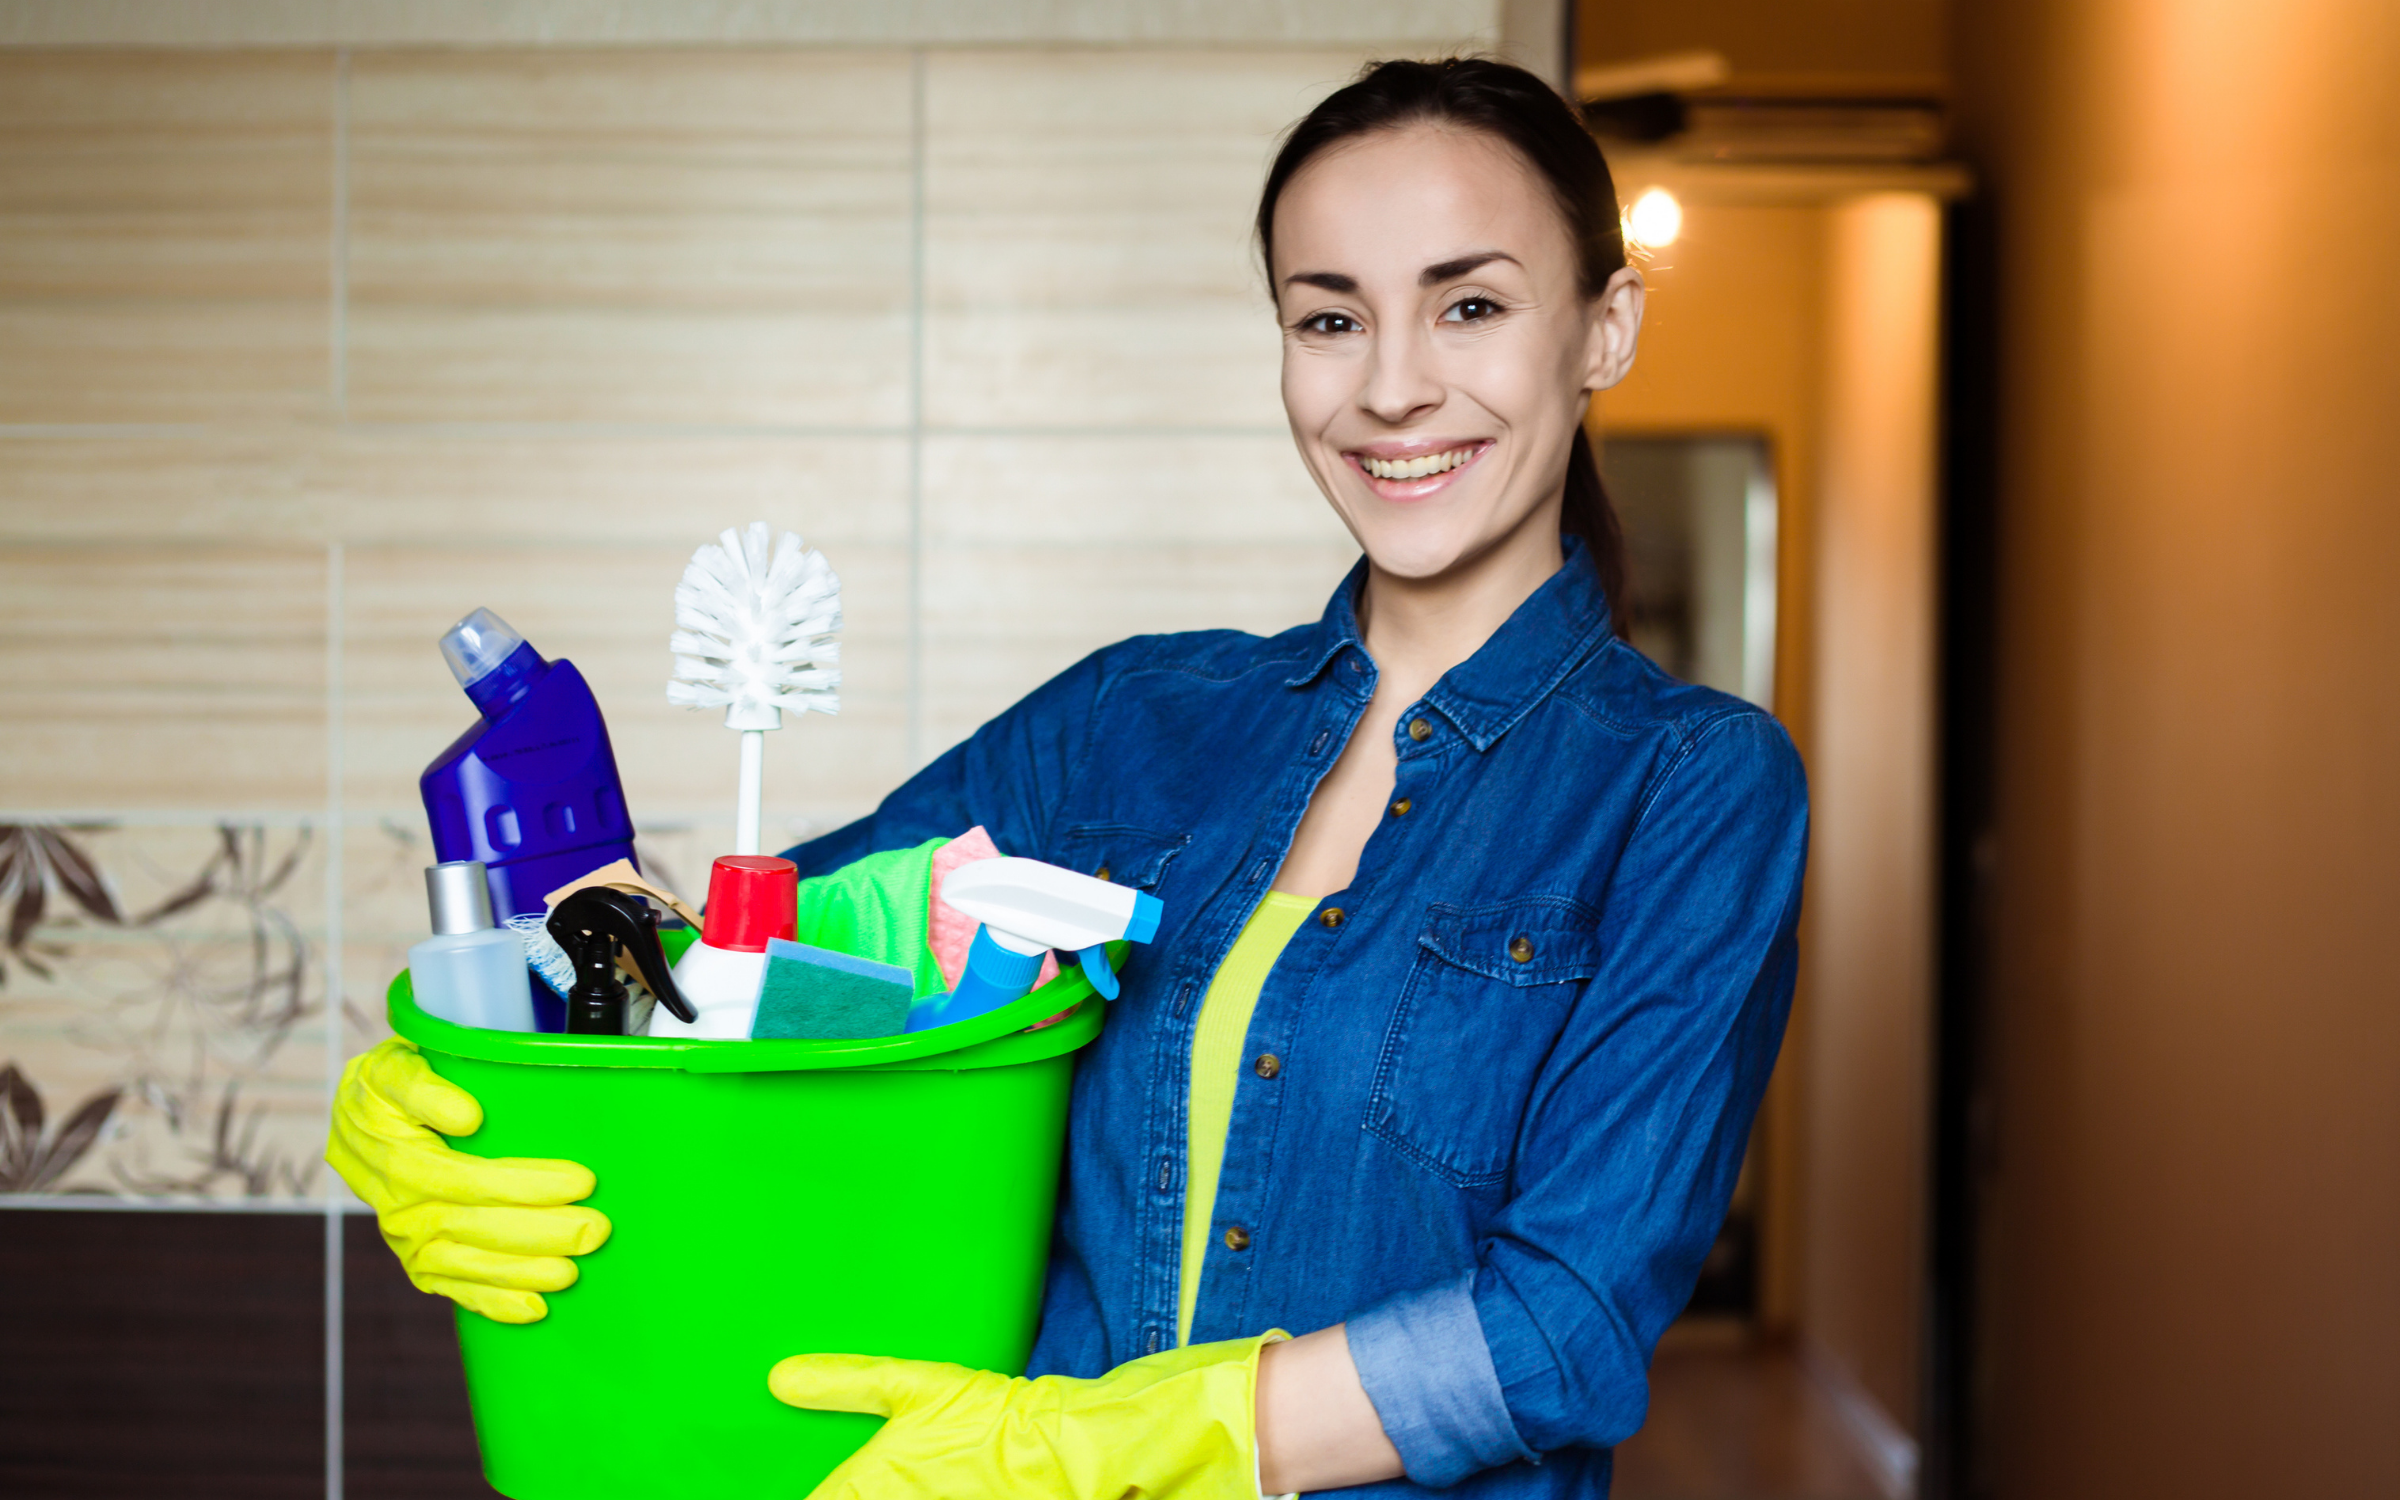 Maid Services in Foth Worth TX